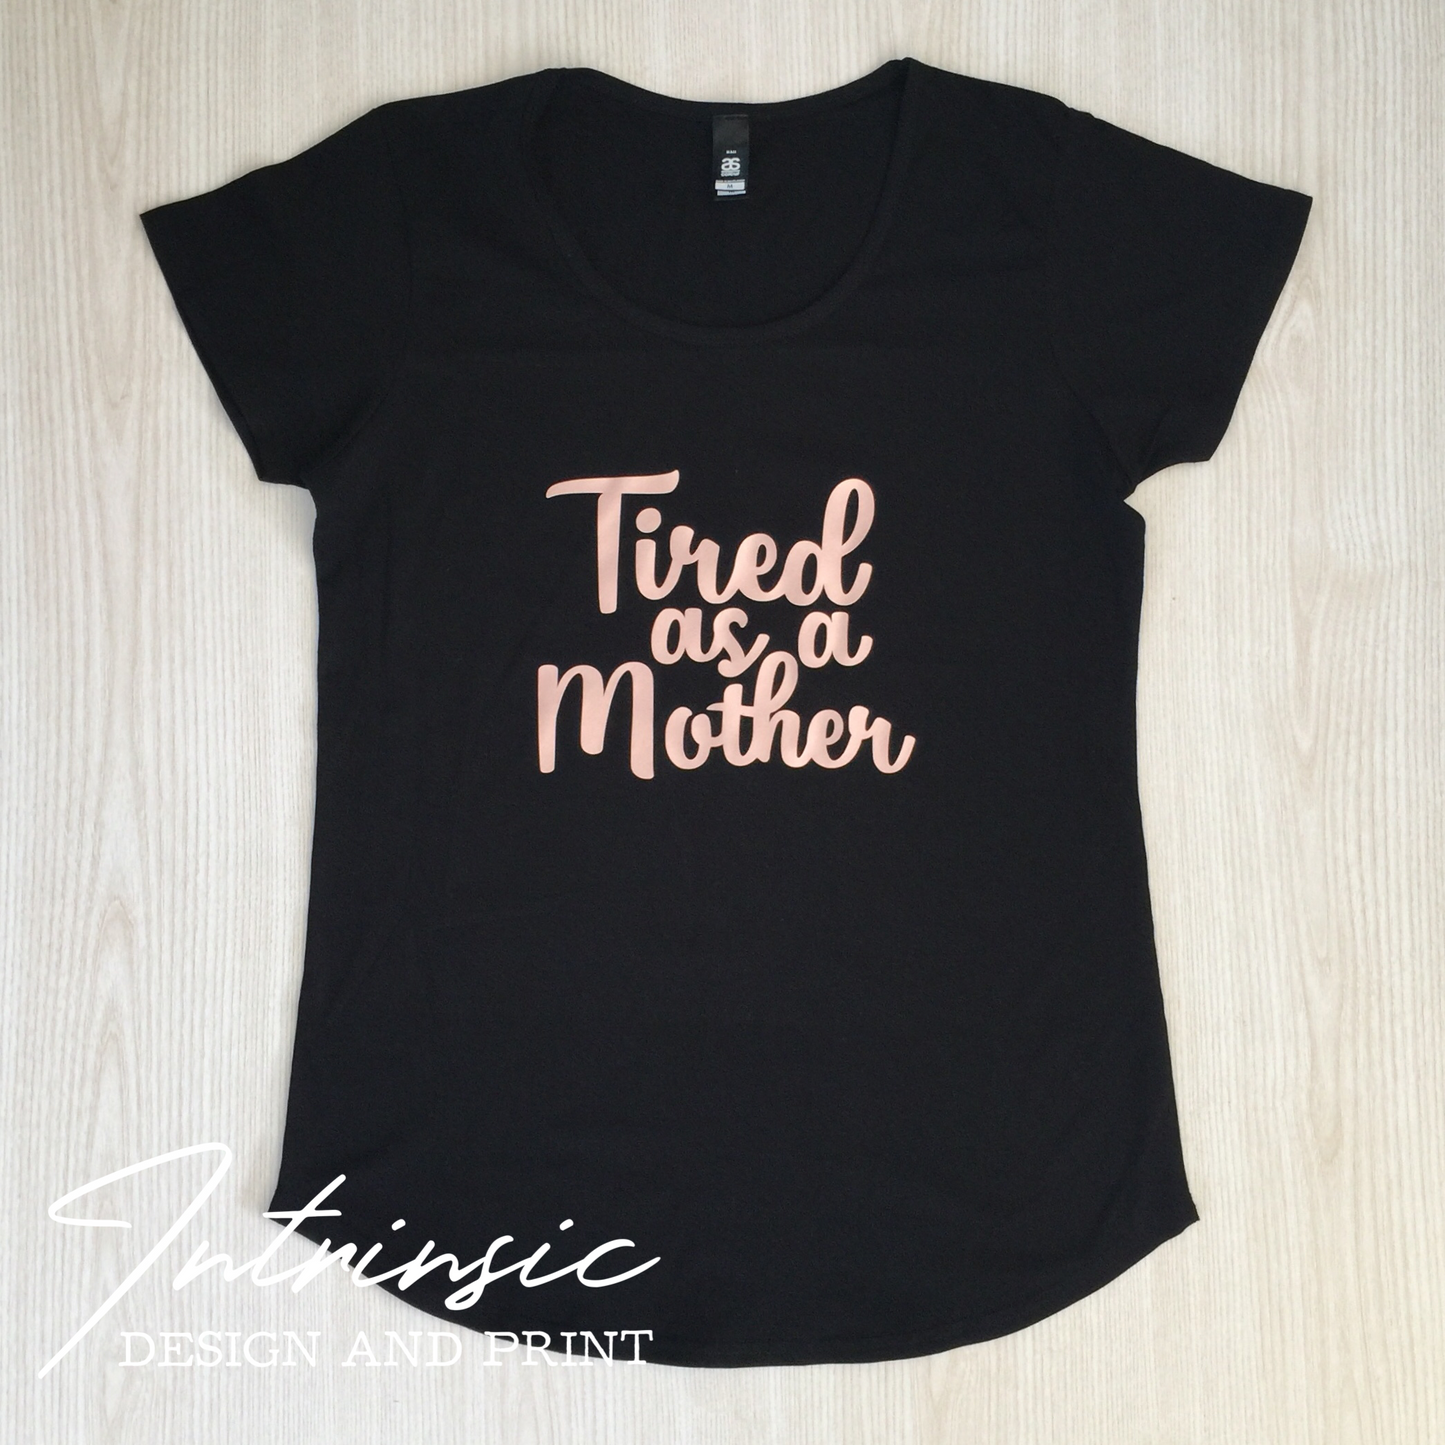 Tired as a Mother tee